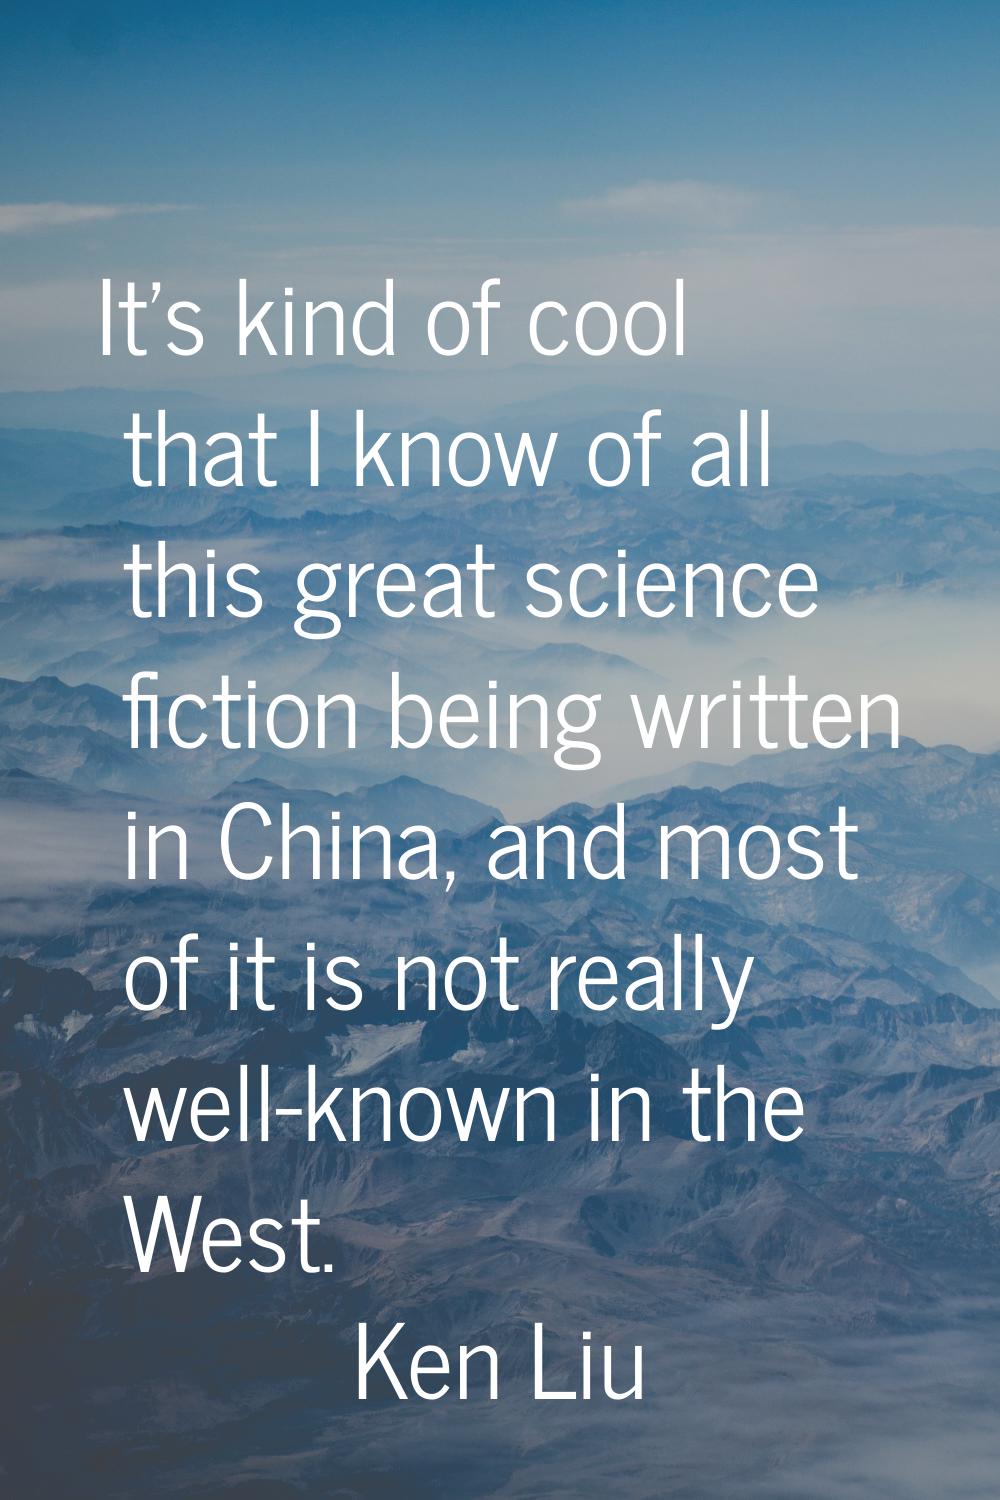 It's kind of cool that I know of all this great science fiction being written in China, and most of